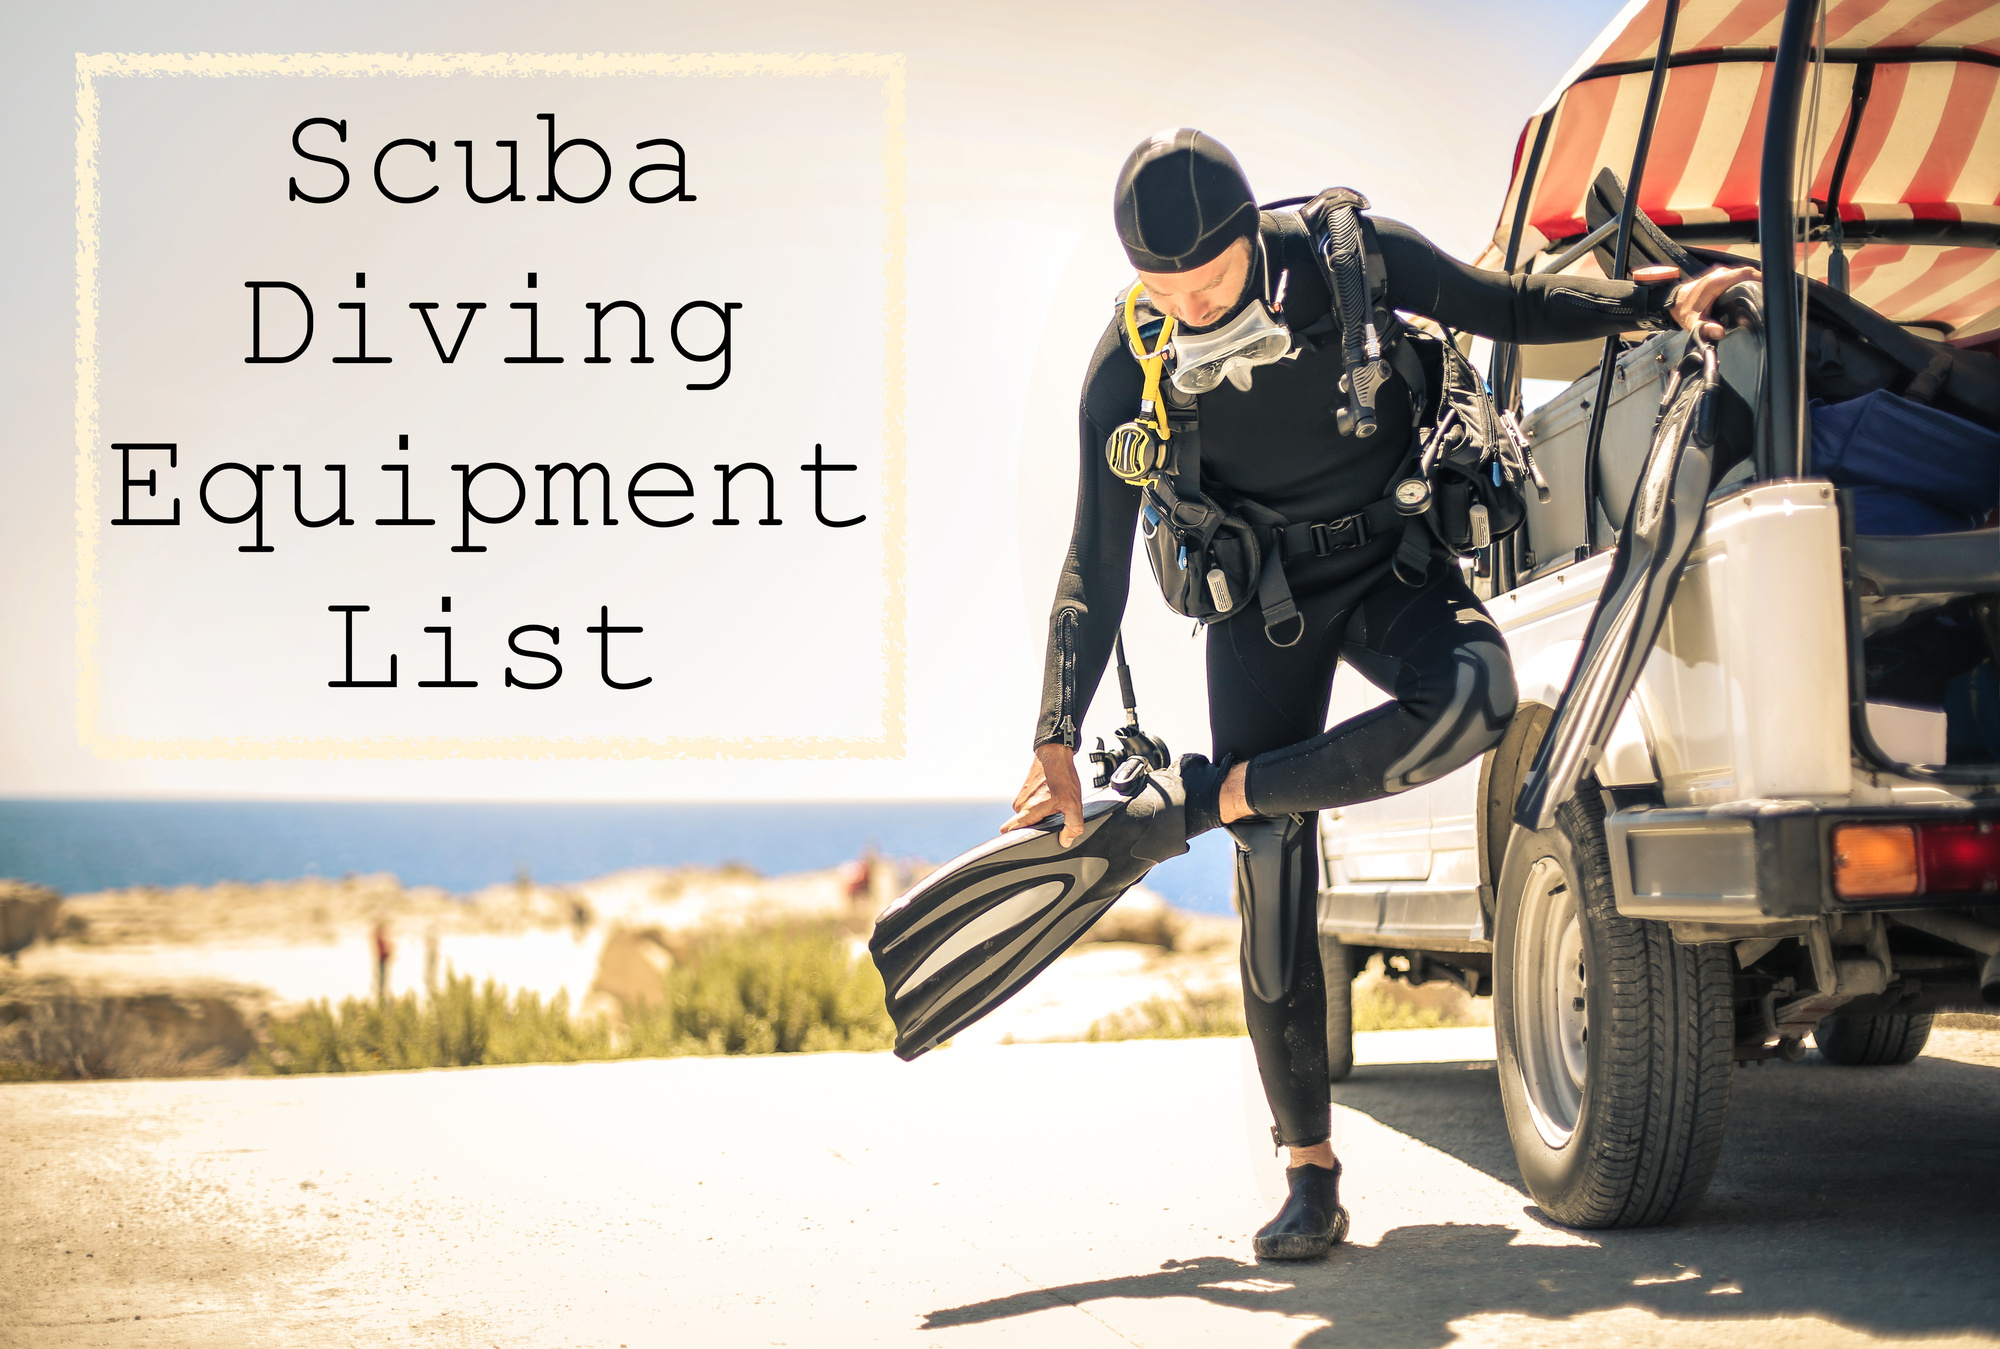 The Complete and Only Scuba Diving Checklist You’ll Ever Need